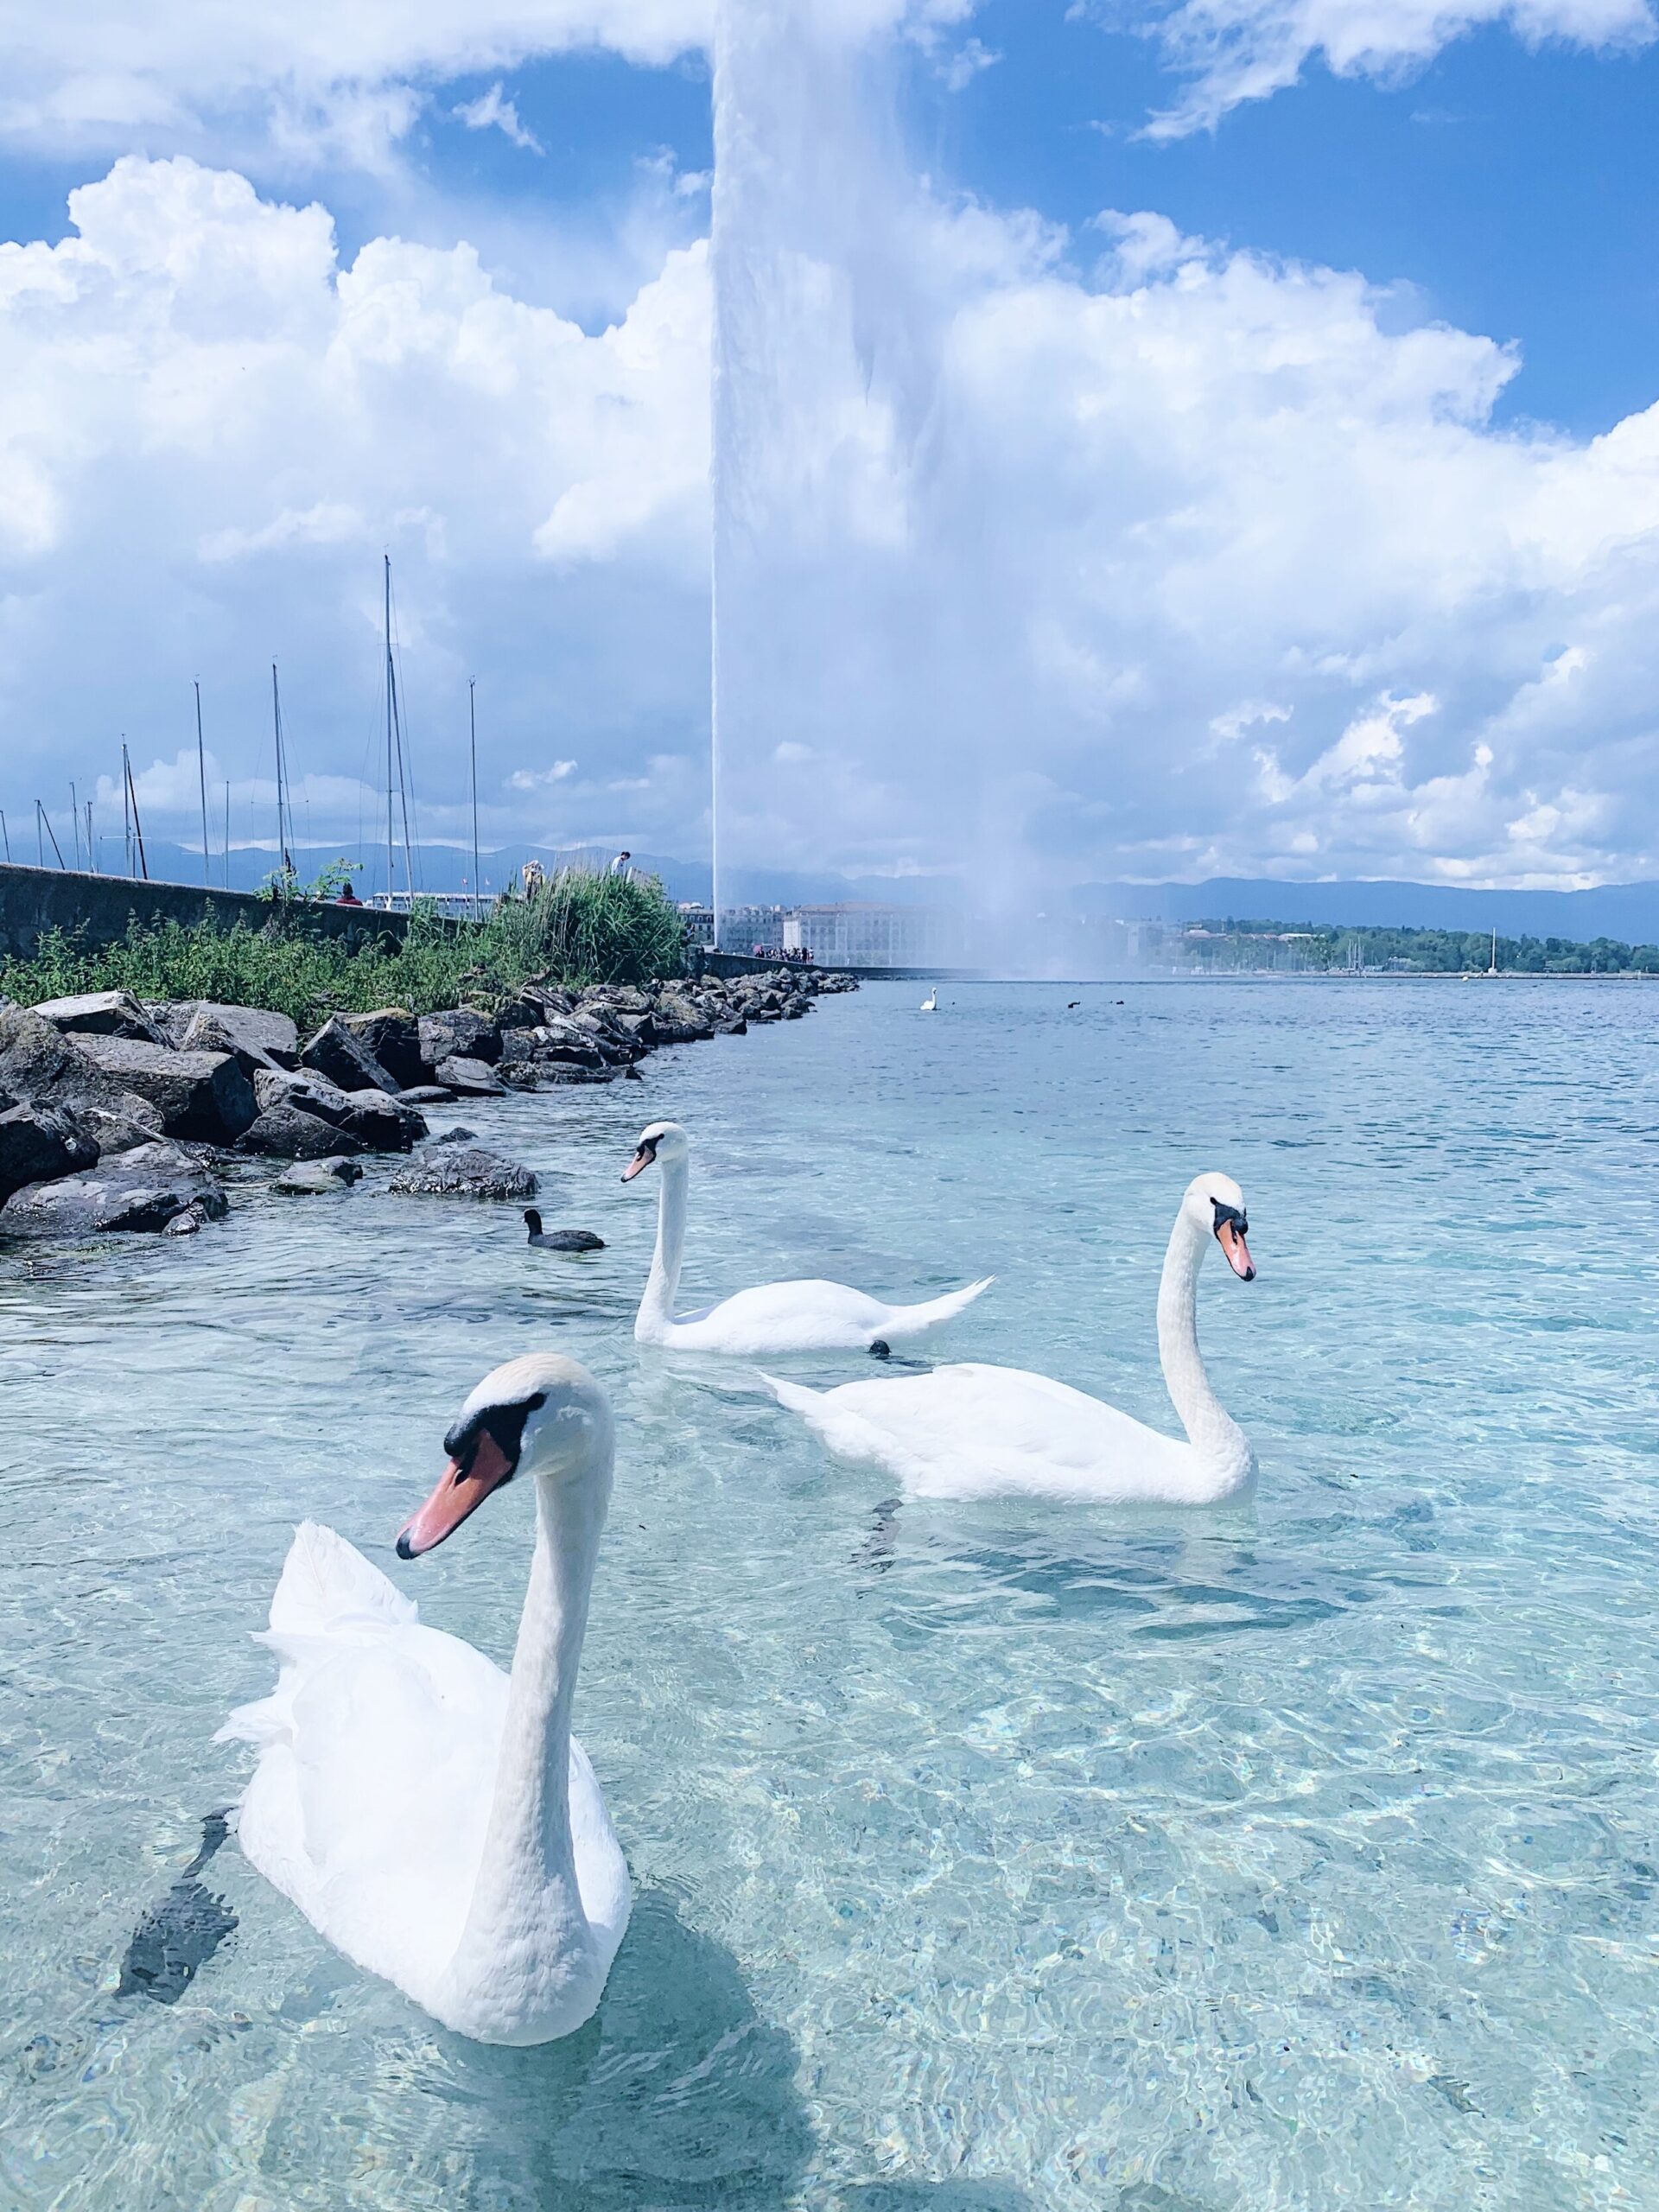 Geneva, Switzerland Travel Guide: Studying Abroad for a Summer